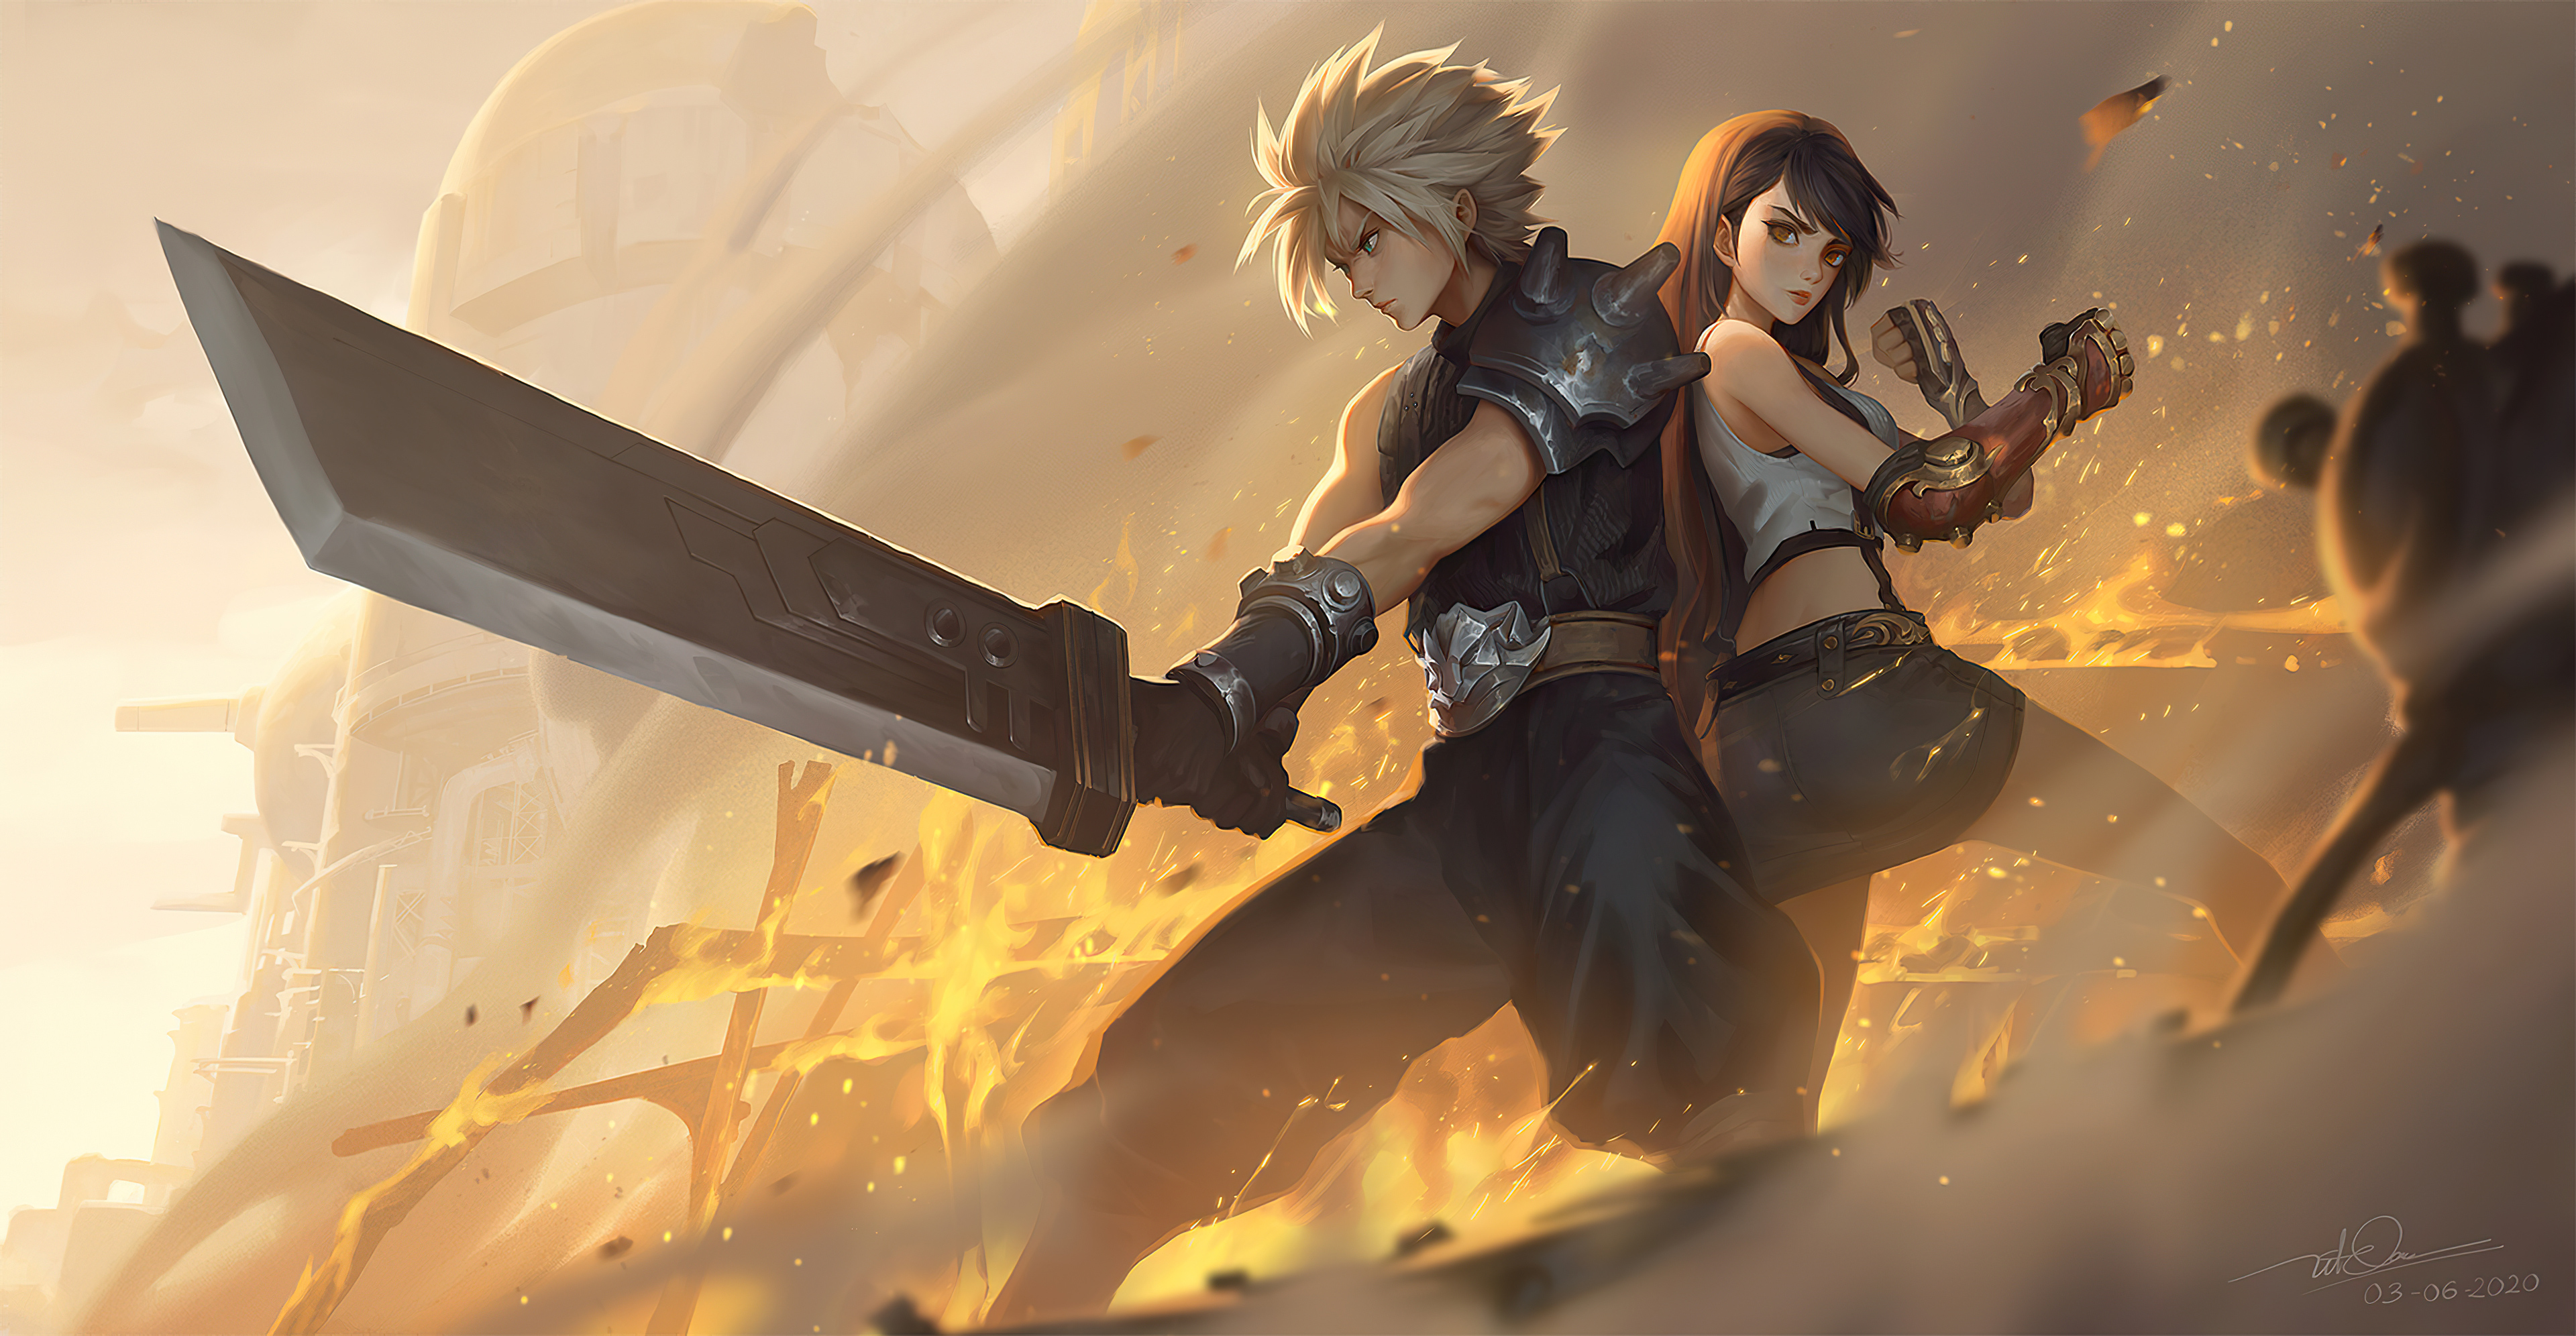 Video Game Final Fantasy VII Remake HD Wallpaper by Dao Trong Le